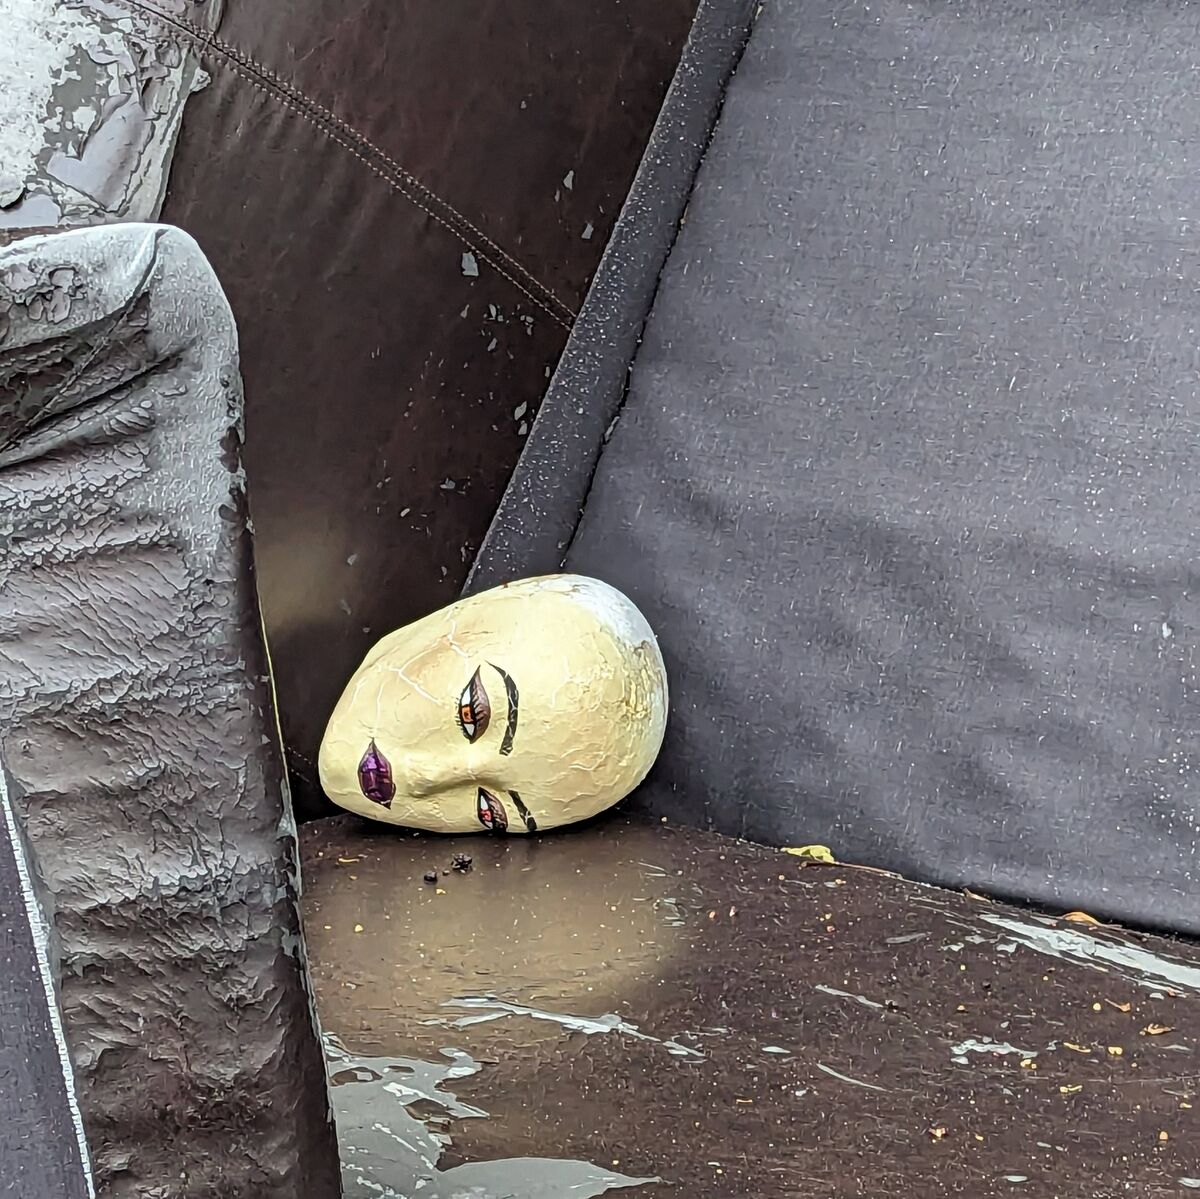 A mannequin head sitting on a couch by the trash - looks like it was used for practicing doing makeup on.